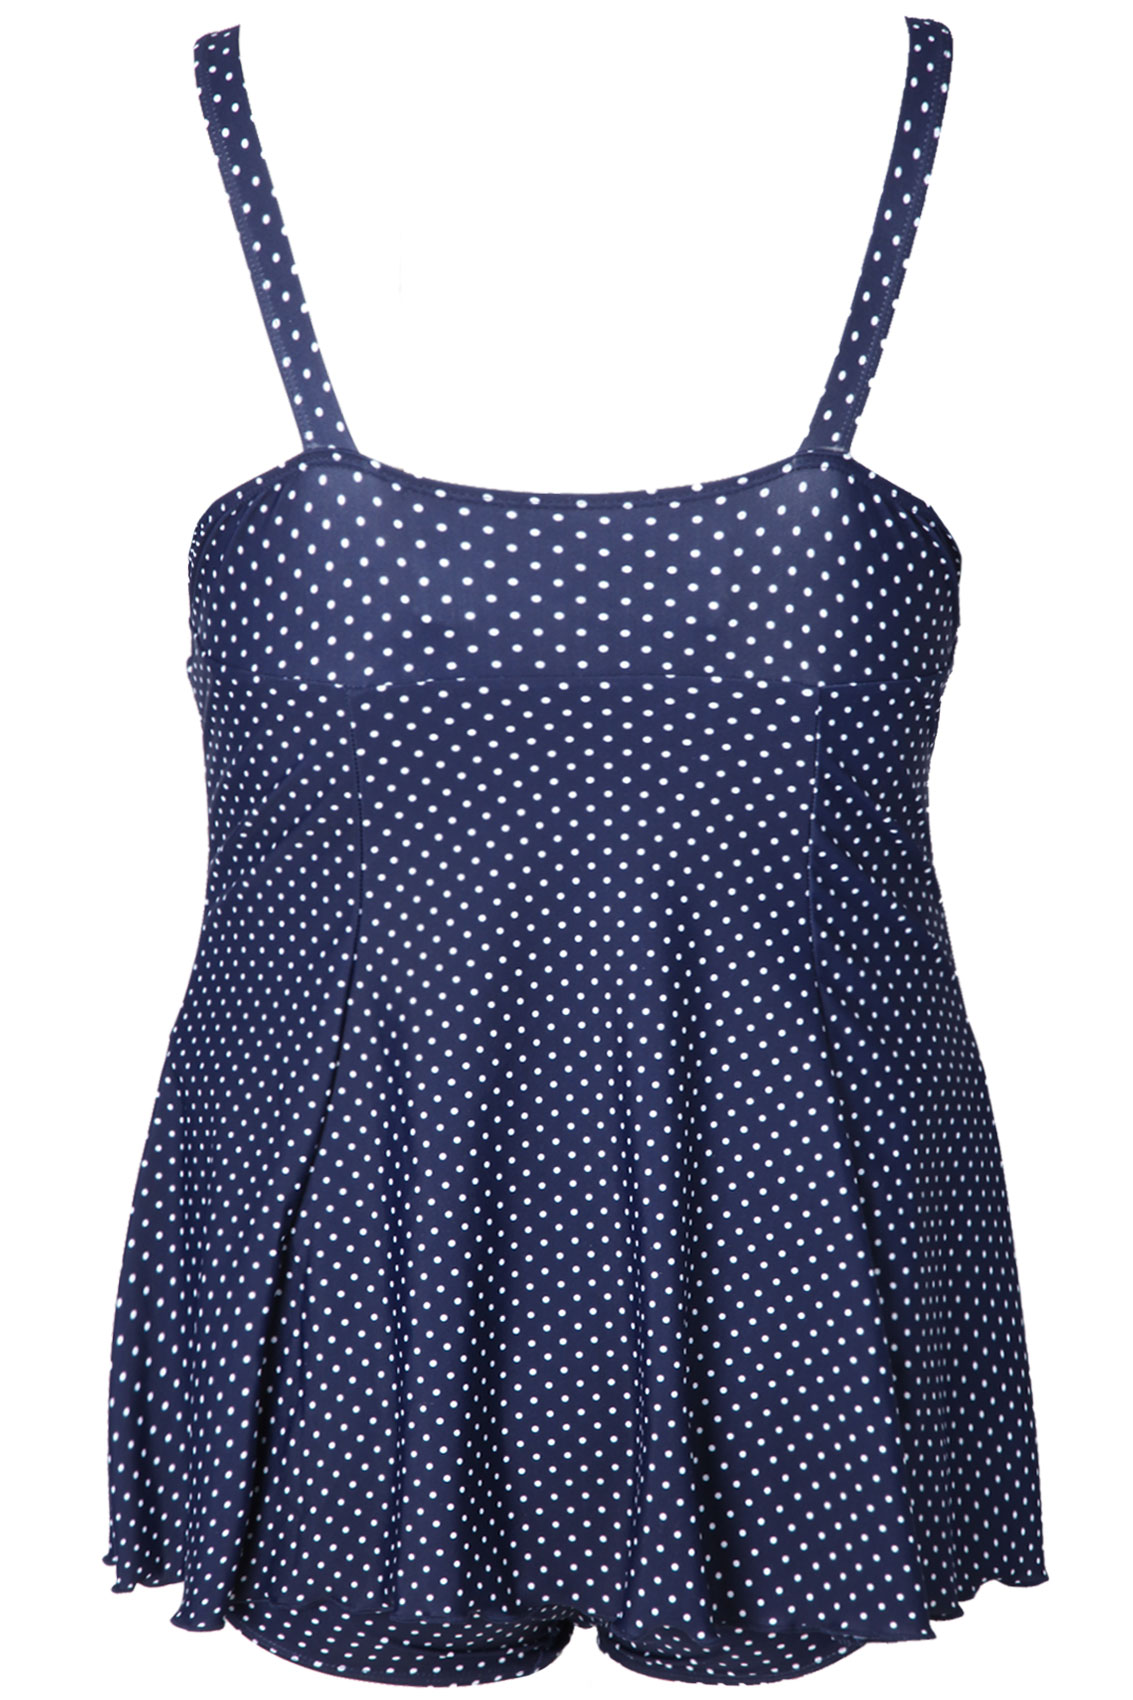 Navy Polka Dot Skirted Swimsuit With Tummy Control Plus Size 161820222426283032